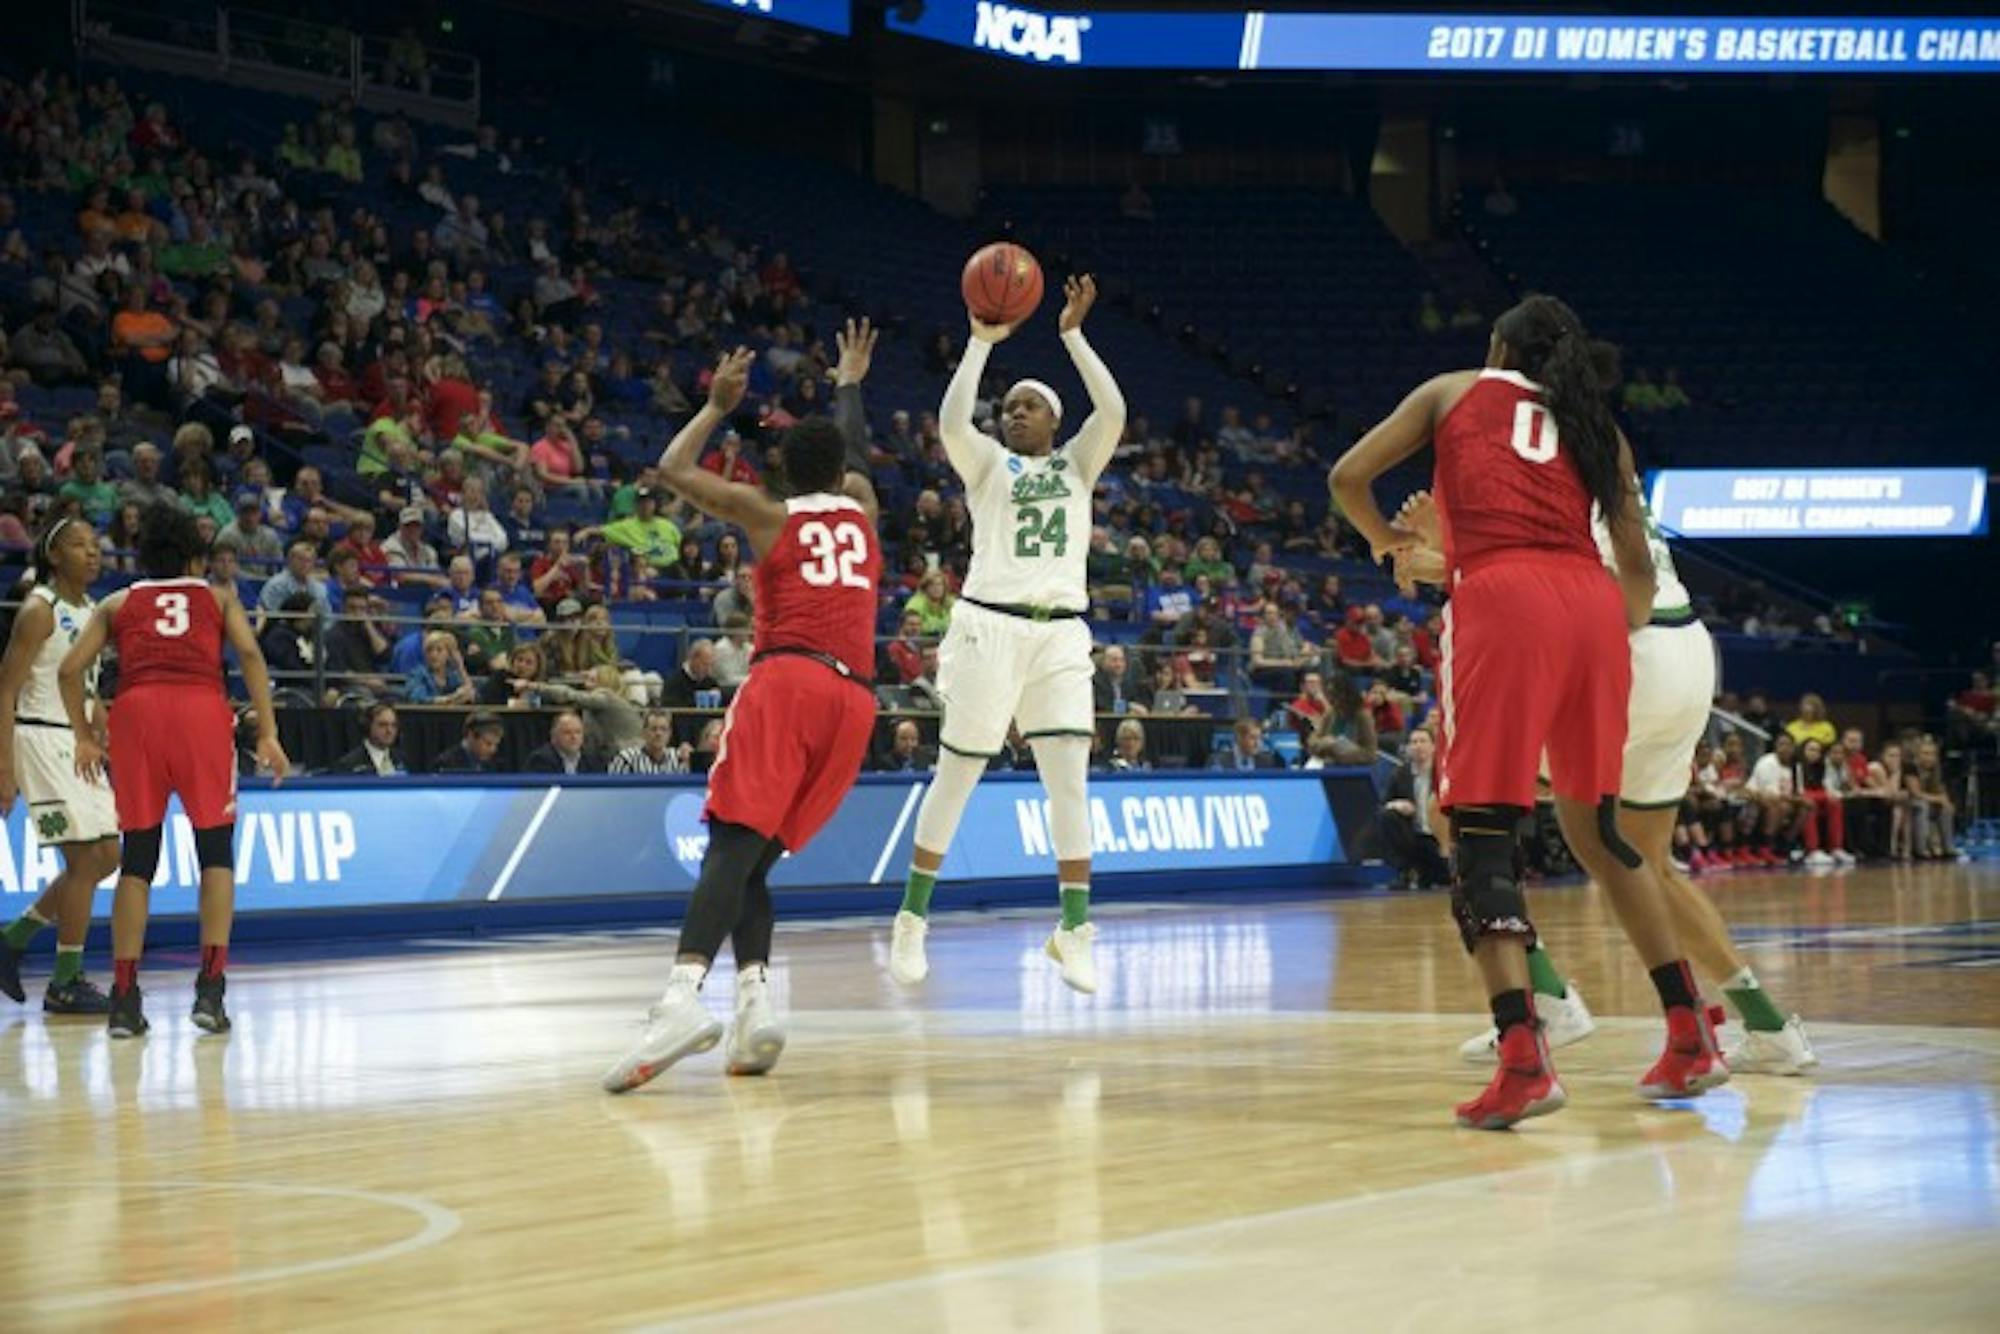 Irish sophomore guard Arike Ogunbowale attempts a 3-pointer during Notre Dame's 99-76 win over Ohio State on Friday at Rupp Arena in Lexington, Kentucky.